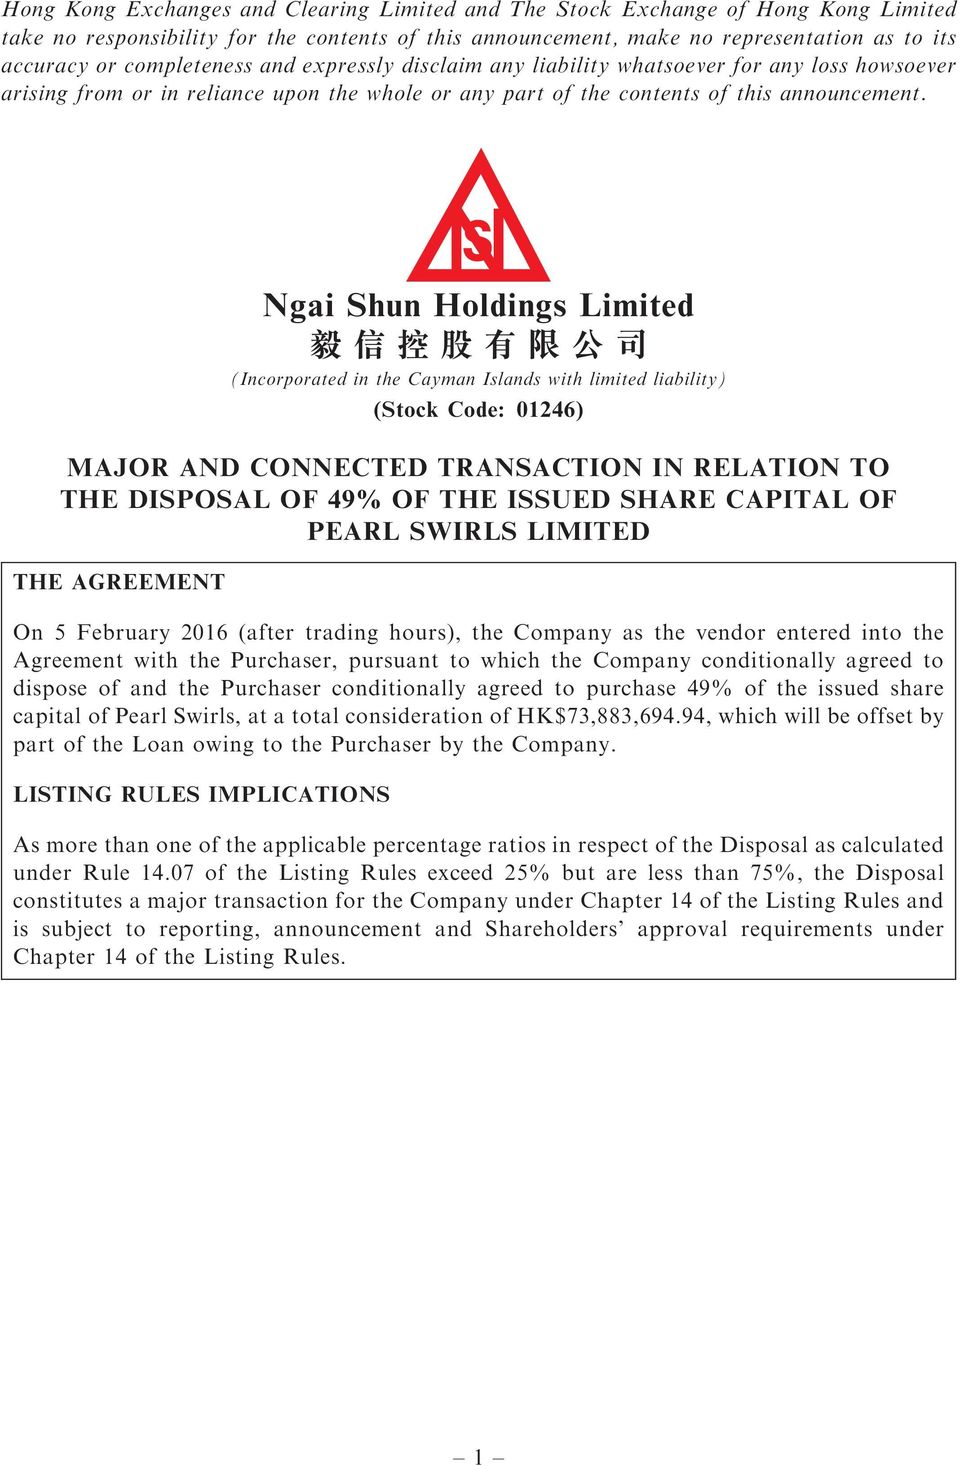 Ngai Shun Holdings Limited 毅 信 控 股 有 限 公 司 (Incorporated in the Cayman Islands with limited liability) (Stock Code: 01246) MAJOR AND CONNECTED TRANSACTION IN RELATION TO THE DISPOSAL OF 49% OF THE